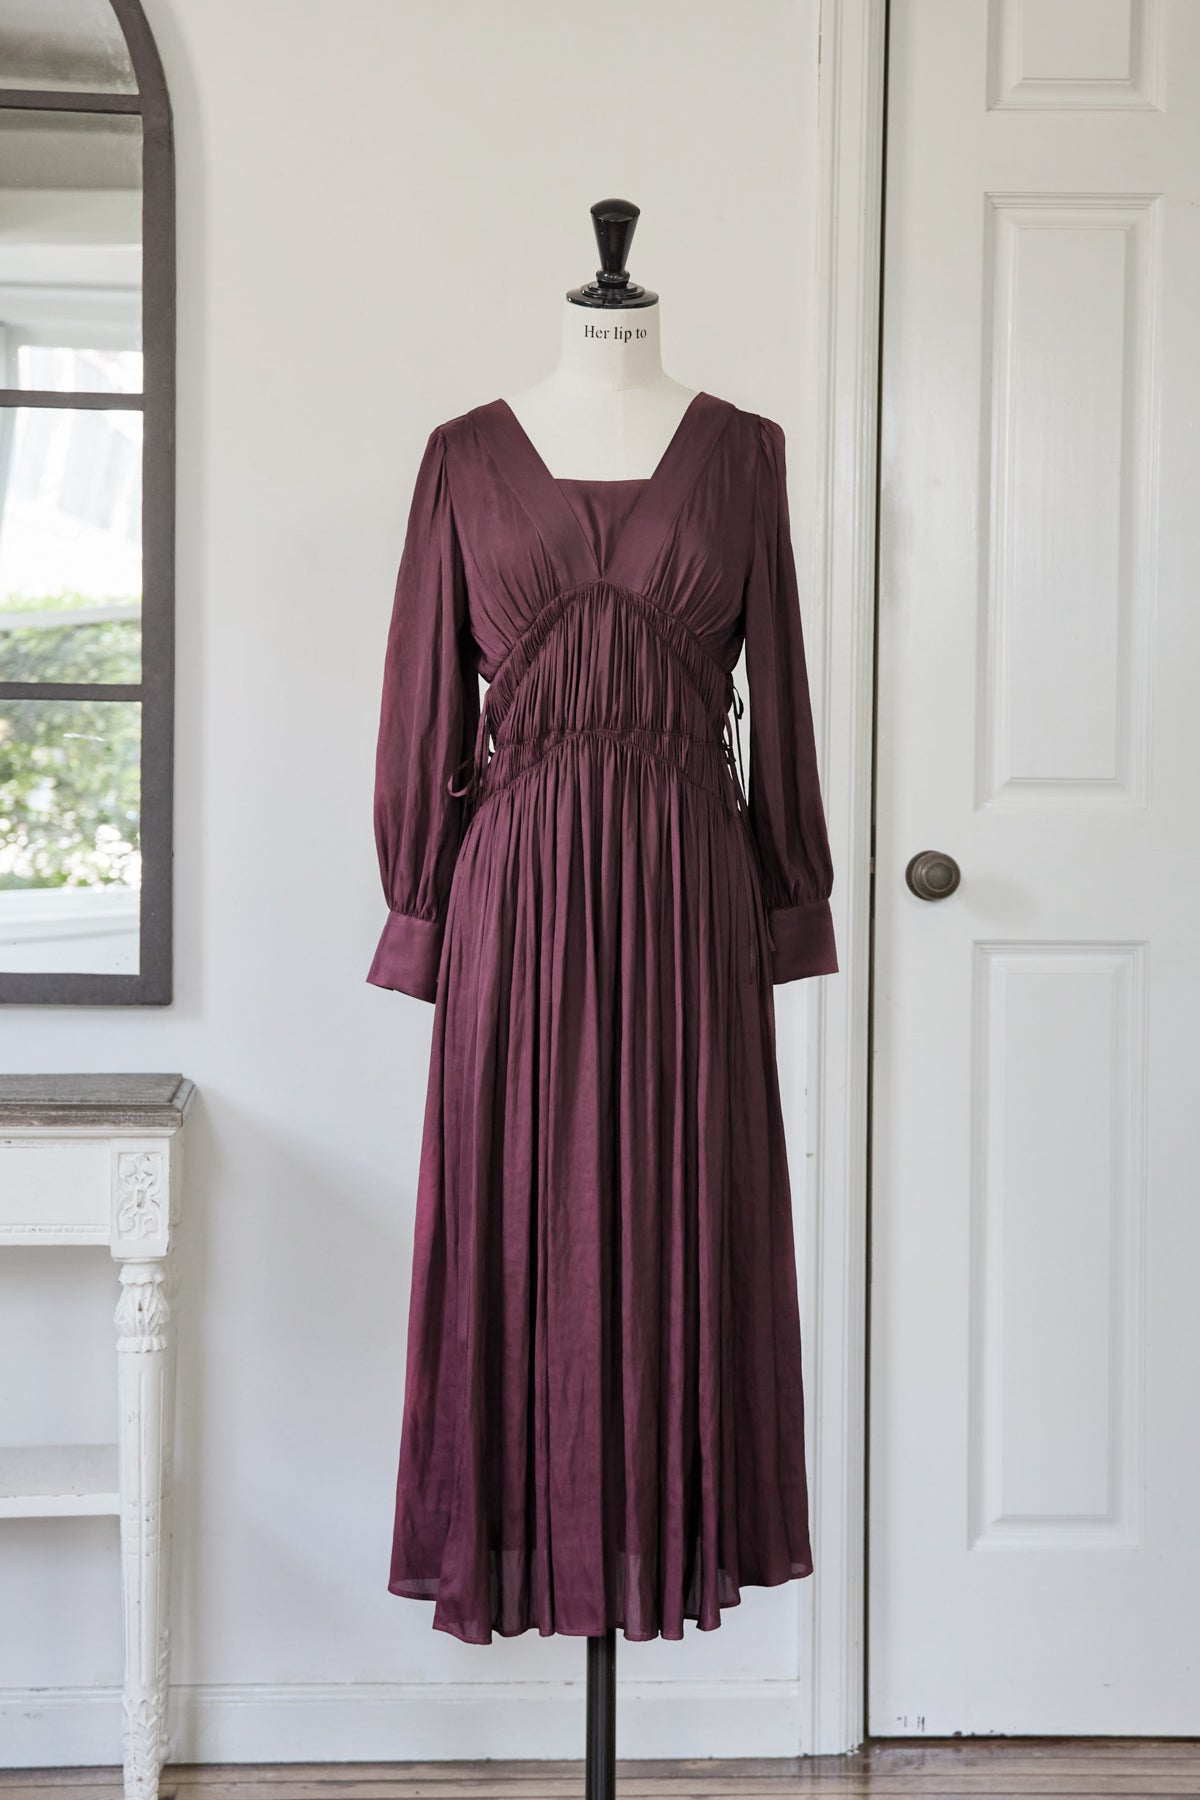 Her lip to♡Side Bow Vintage Twill Dress | myglobaltax.com